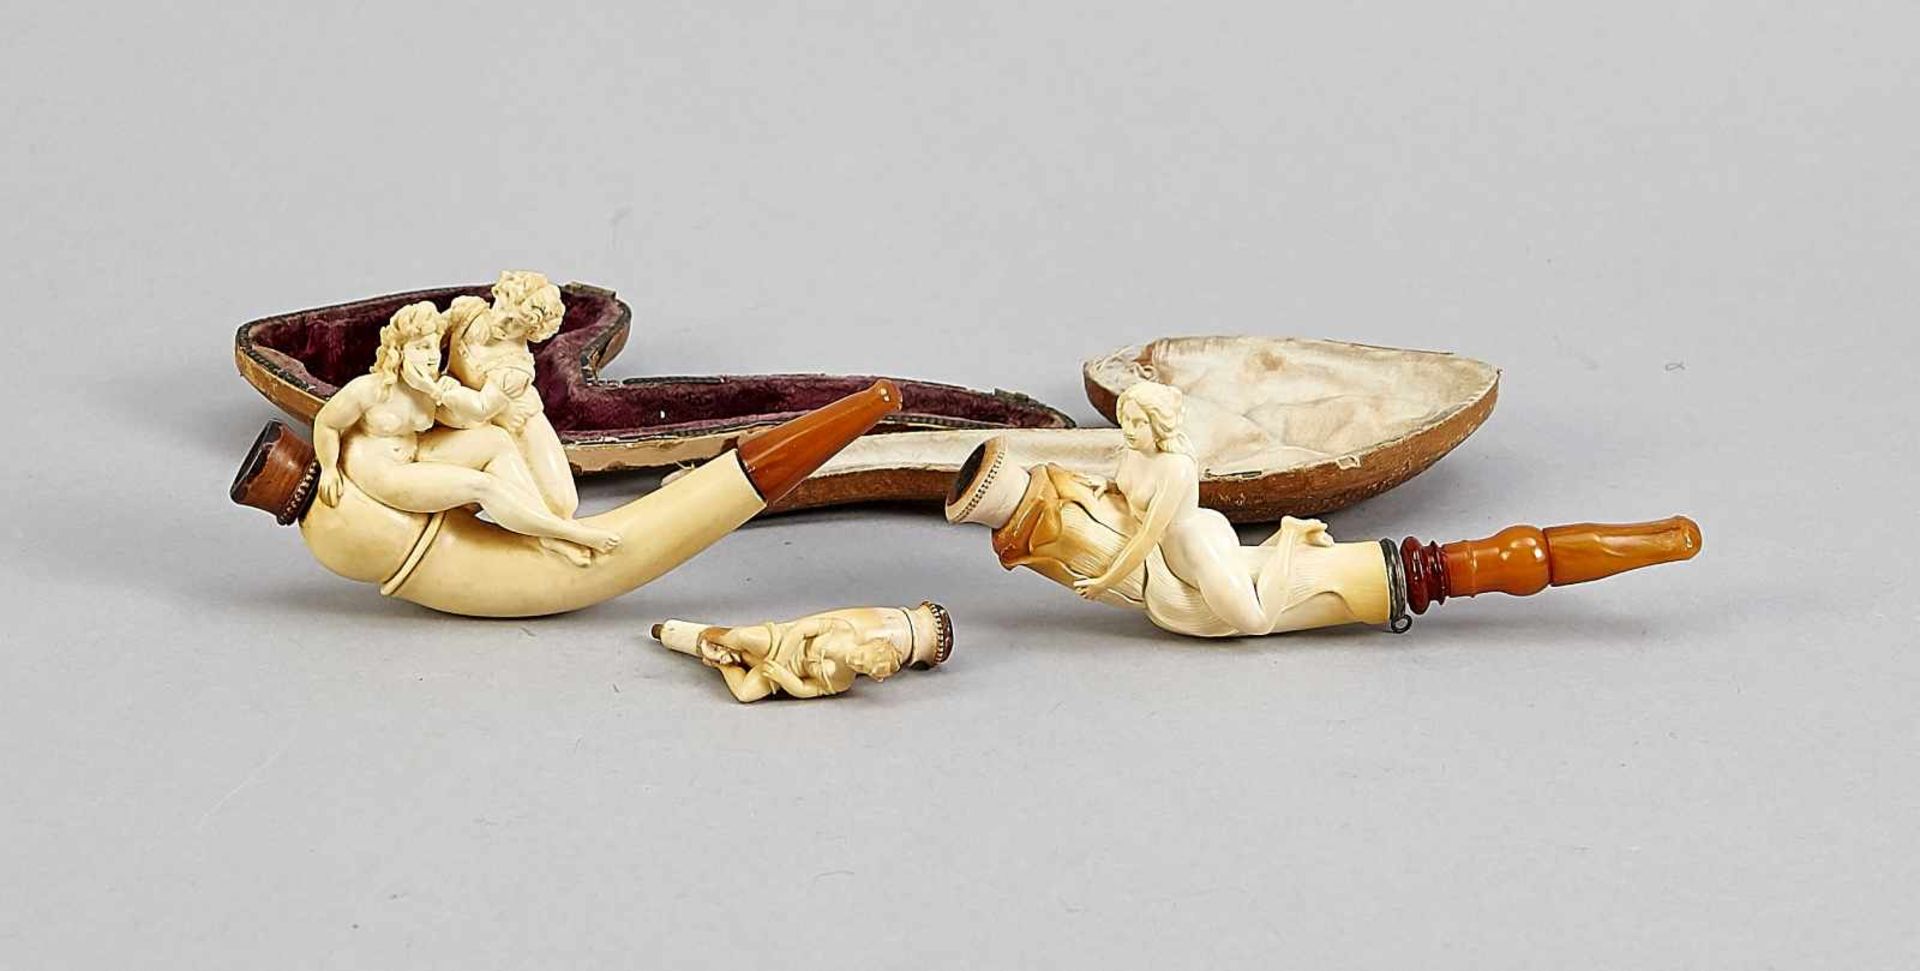 Two figural meerschaum pipes w. amber mouthpieces, pres. Austria, 19/20th c., l. 14.5 a.